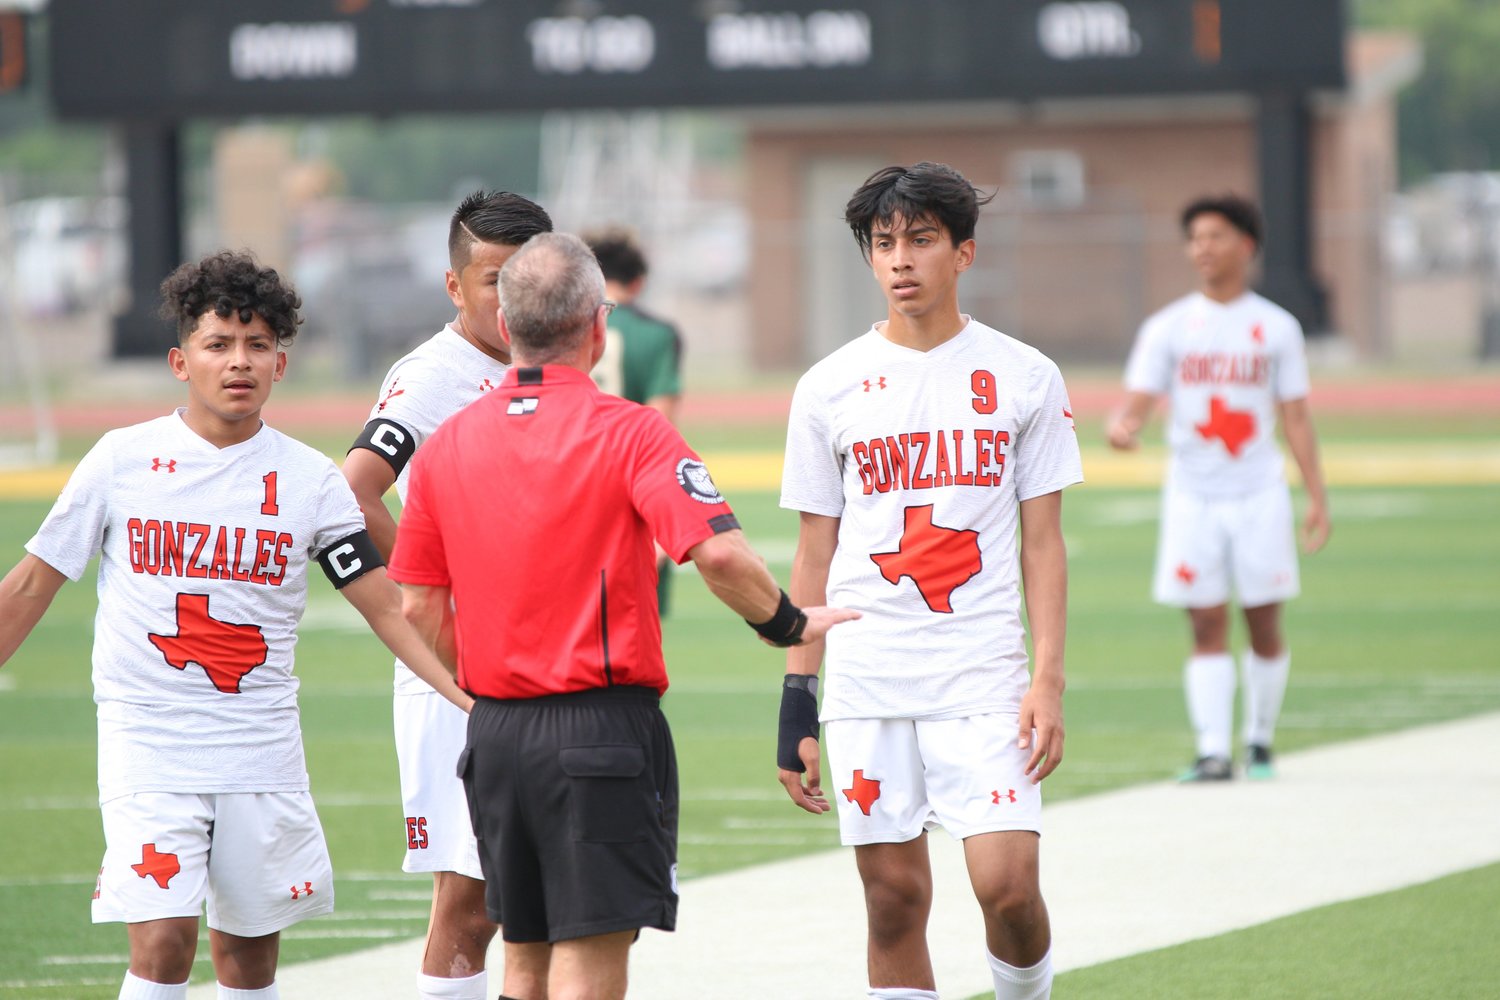 The head official had multiple conversations such as this one with players on both teams throughout the game. Five yellow cards were administered in Canyon Lake’s 2-1 victory over Gonzales.